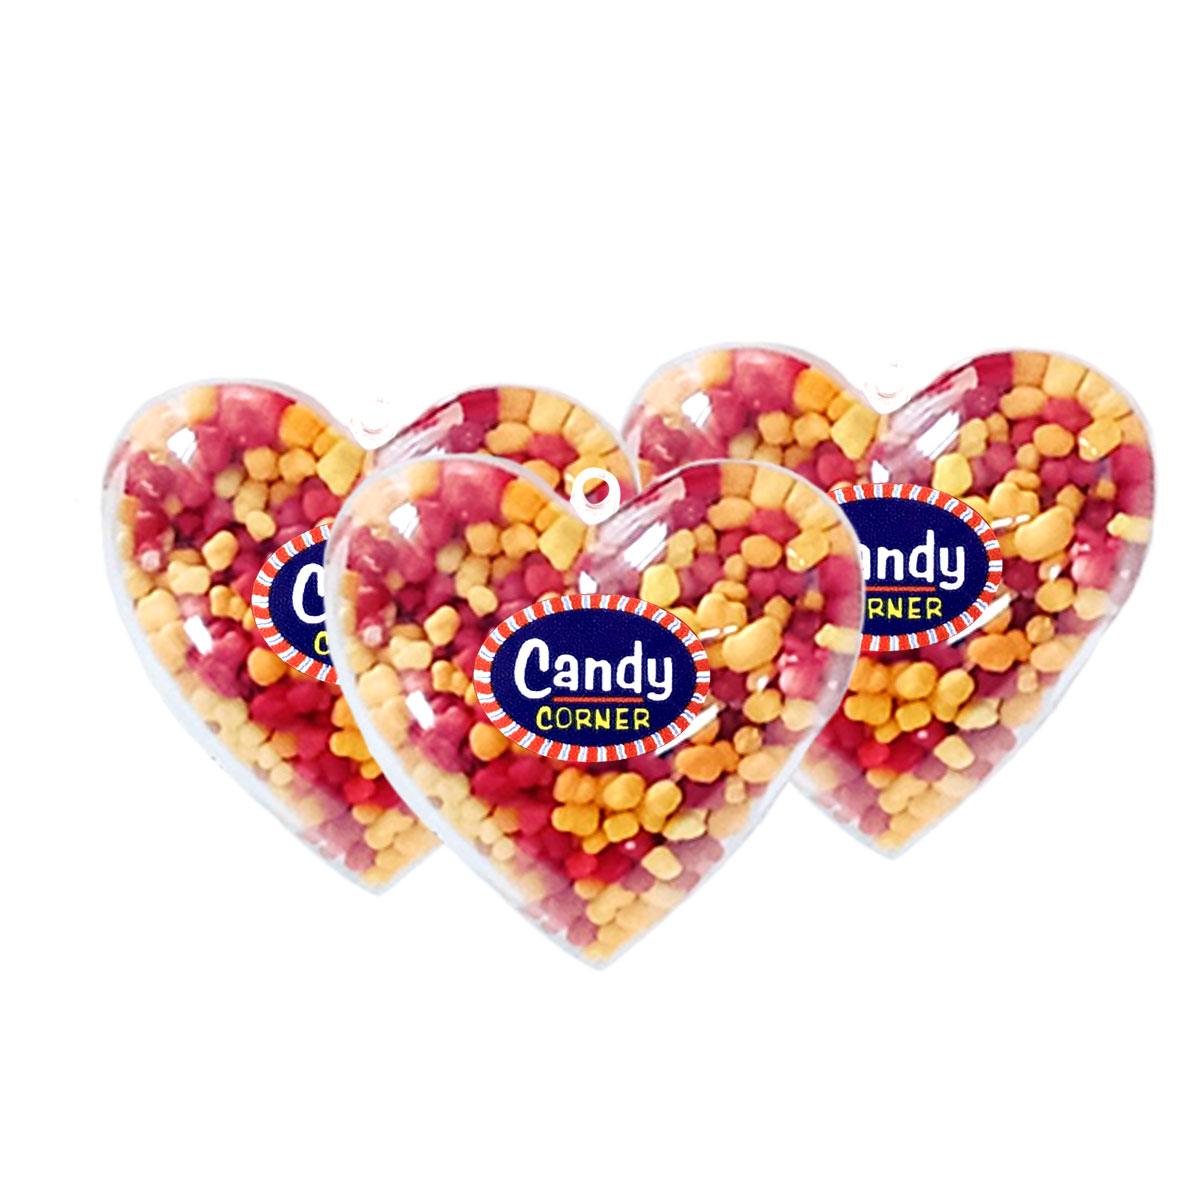 Candy Corner Nerds Double Dipped in heart 80g x 3pcs